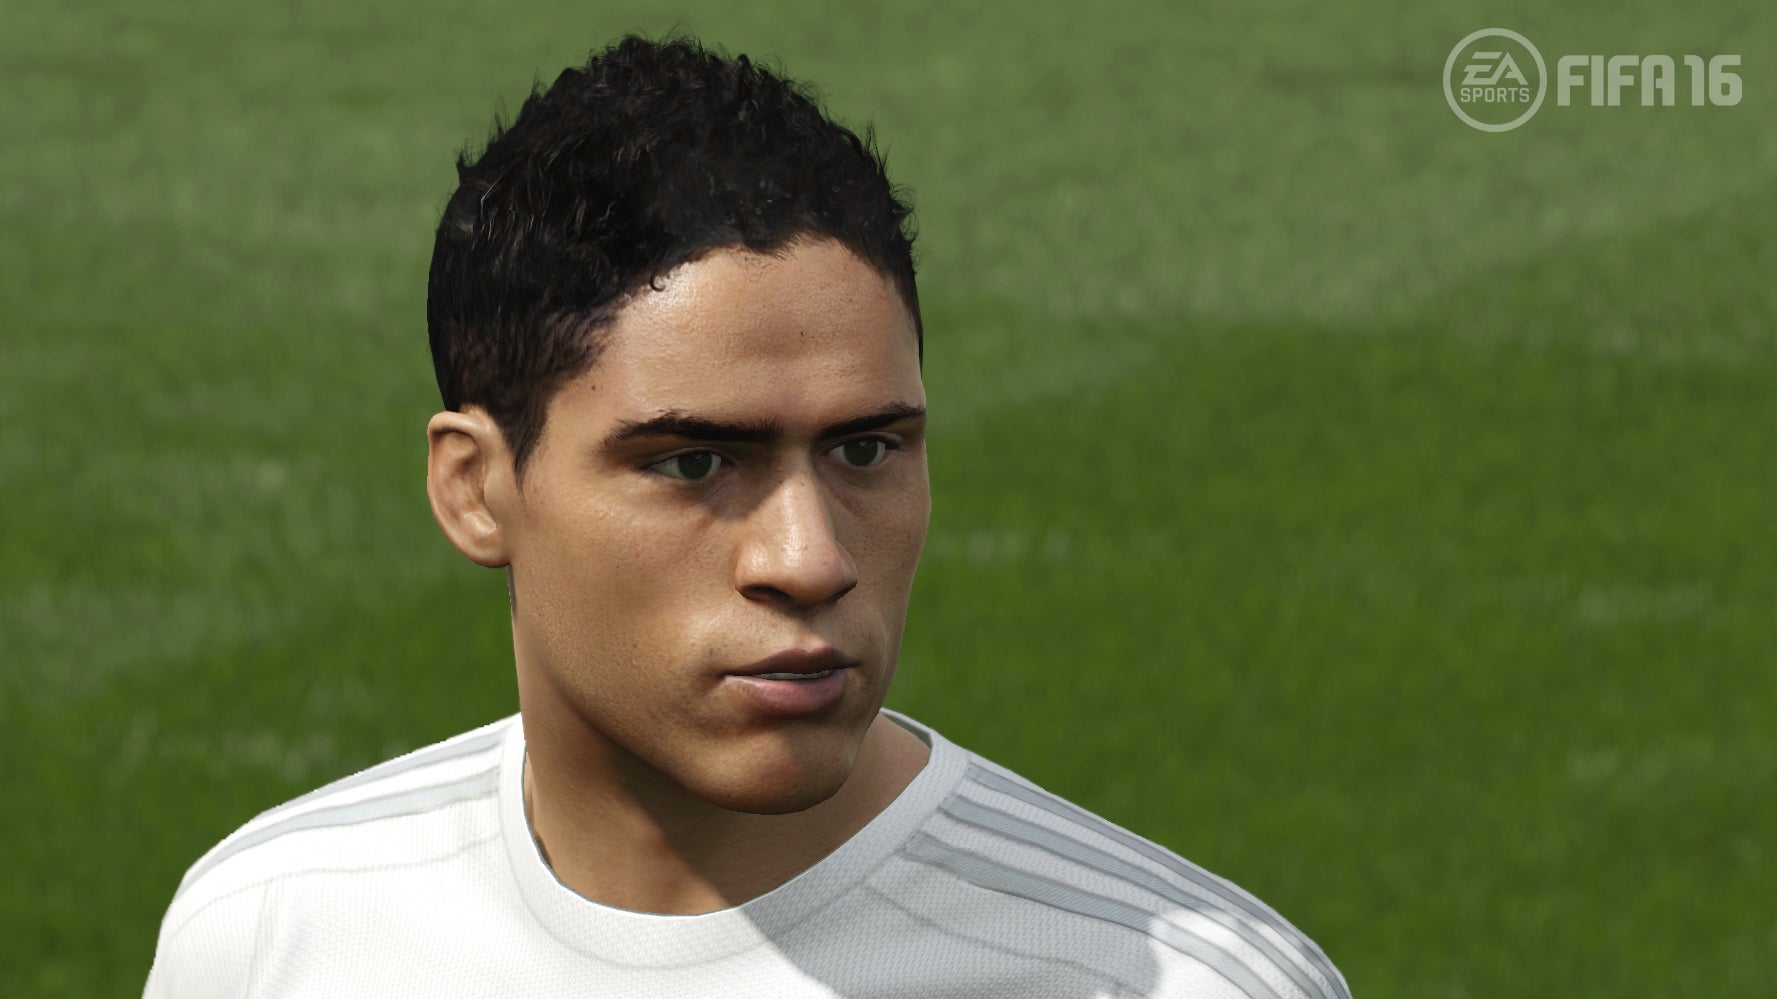 Image for Real Madrid signs exclusivity deal with FIFA 16